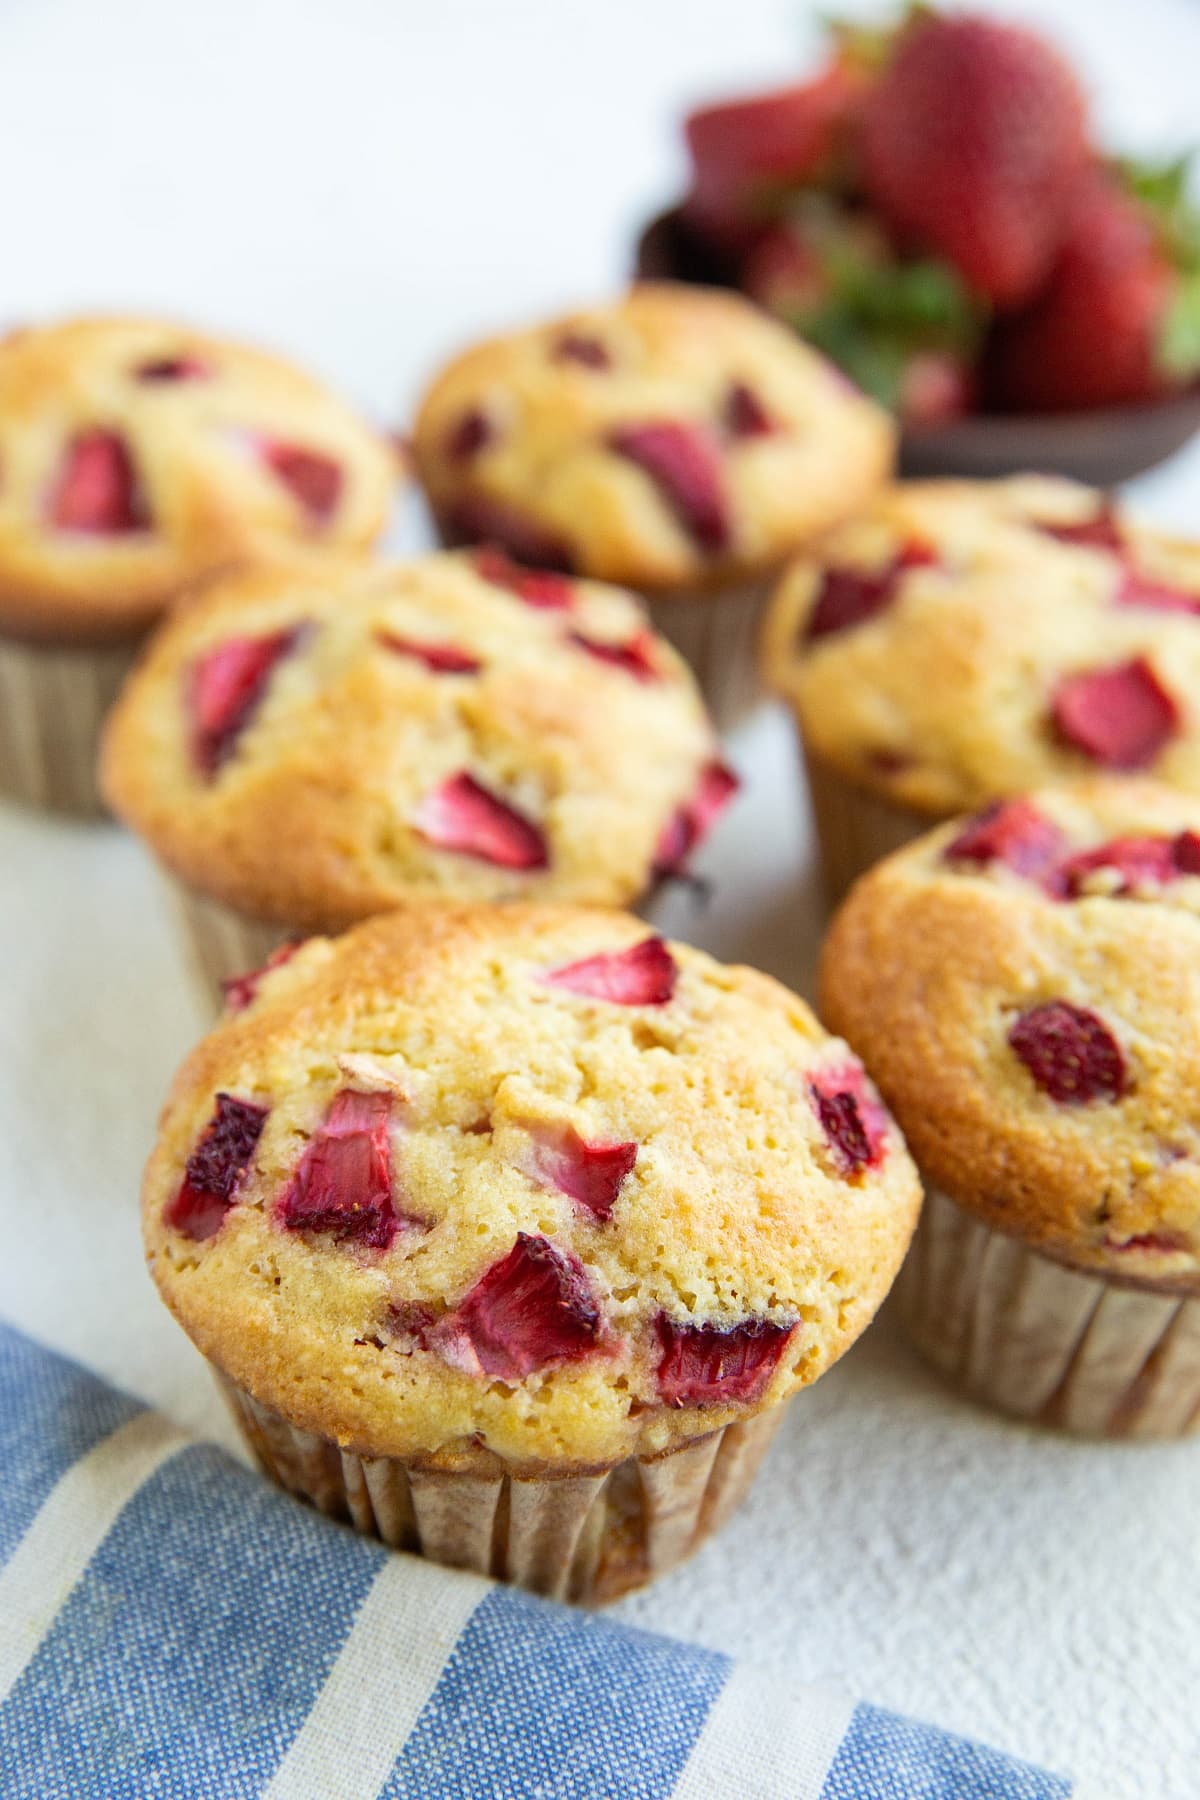 Freshly baked strawberry muffins on a white background with a blue napkin